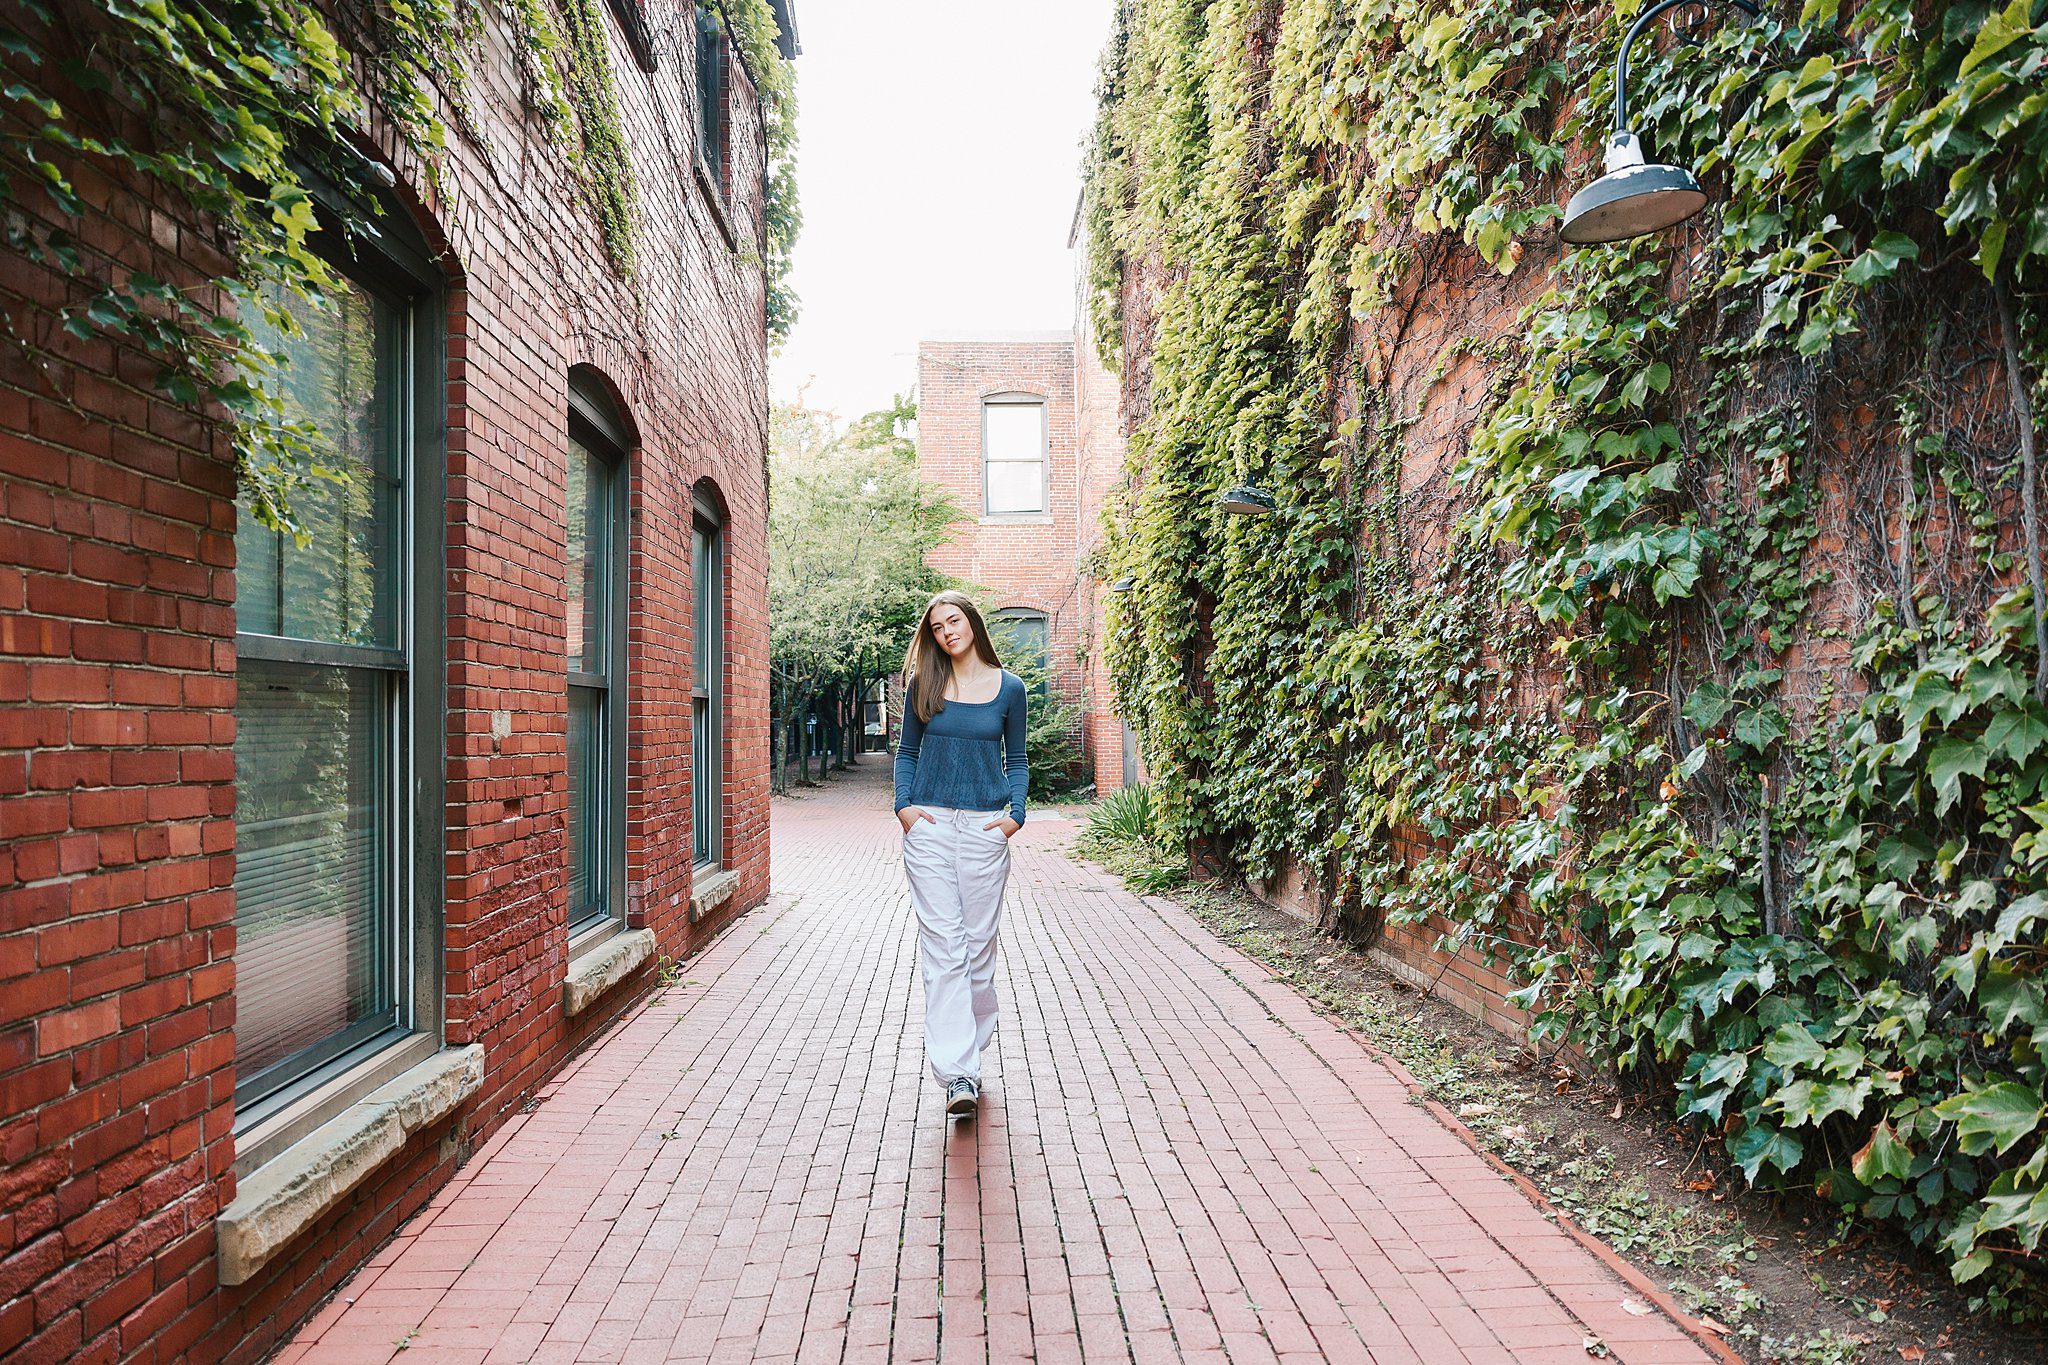 A high school senior walks down an iver covered alley with hands in her white pants pockets